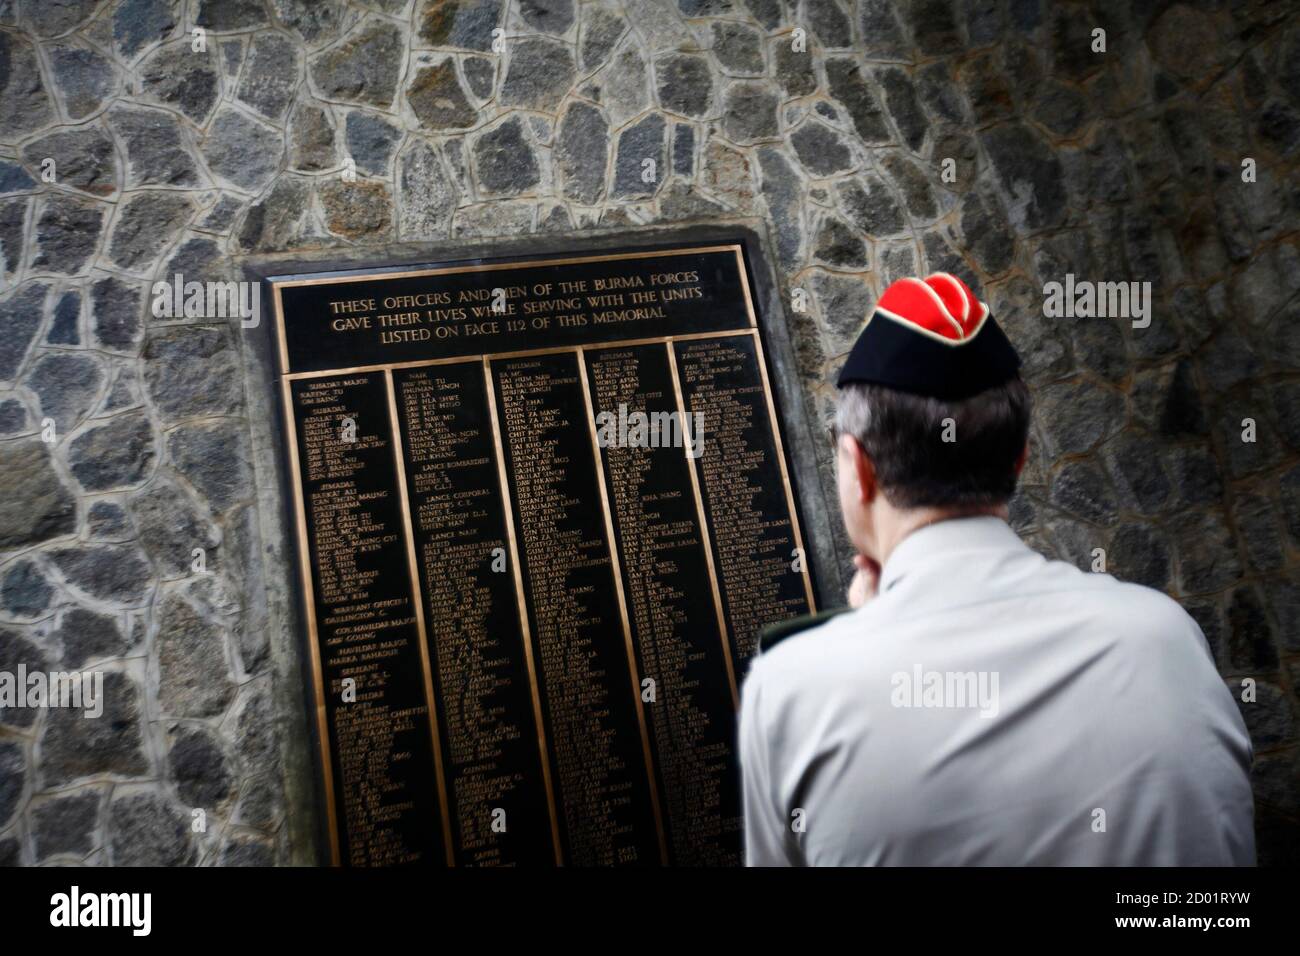 Britain's Chief of Defence Staff, General David Richards, looks at a memorial plaque bearing the names of soldiers who died in Burma, presently known as Myanmar, during World War Two, at Taukkyan war cemetery, on the outskirts of Yangon, June 4, 2013. REUTERS/Minzayar (MYANMAR - Tags: MILITARY POLITICS CONFLICT) Stock Photo